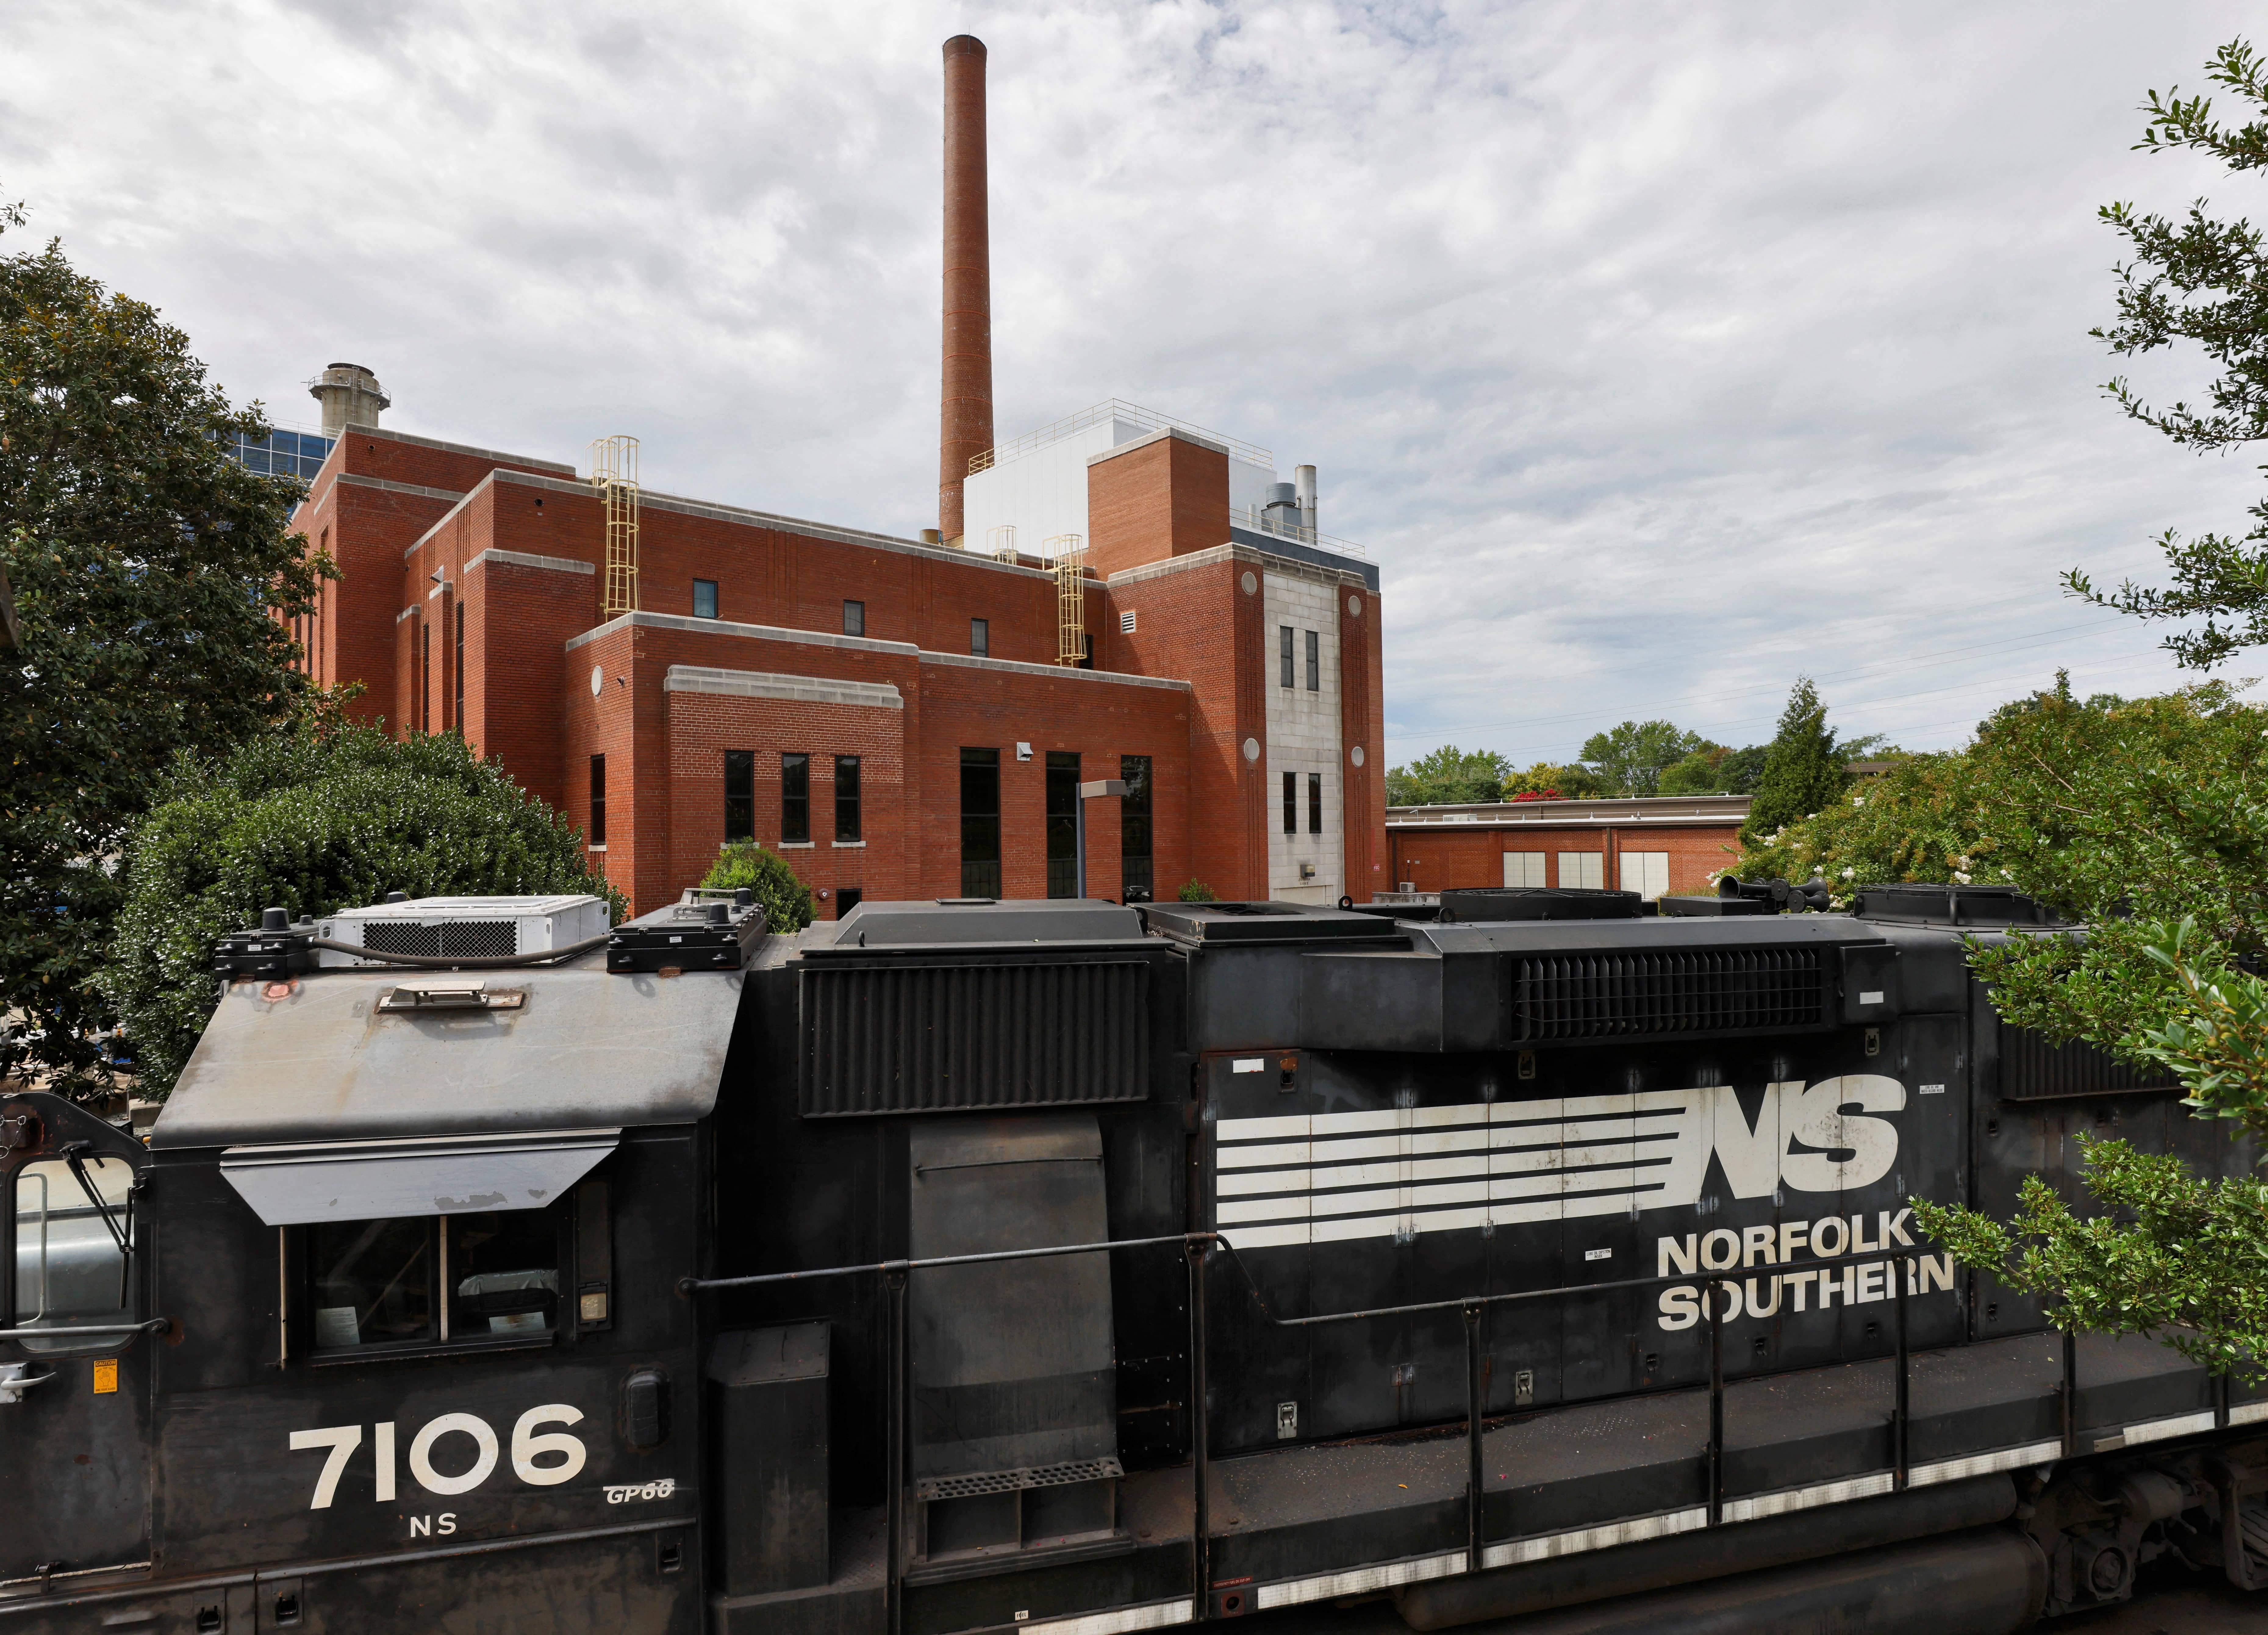 norfolk-southern-train-rests-near-the-university-of-north-carolinas-energy-generation-plant-after-delivering-coal-in-chapel-hill